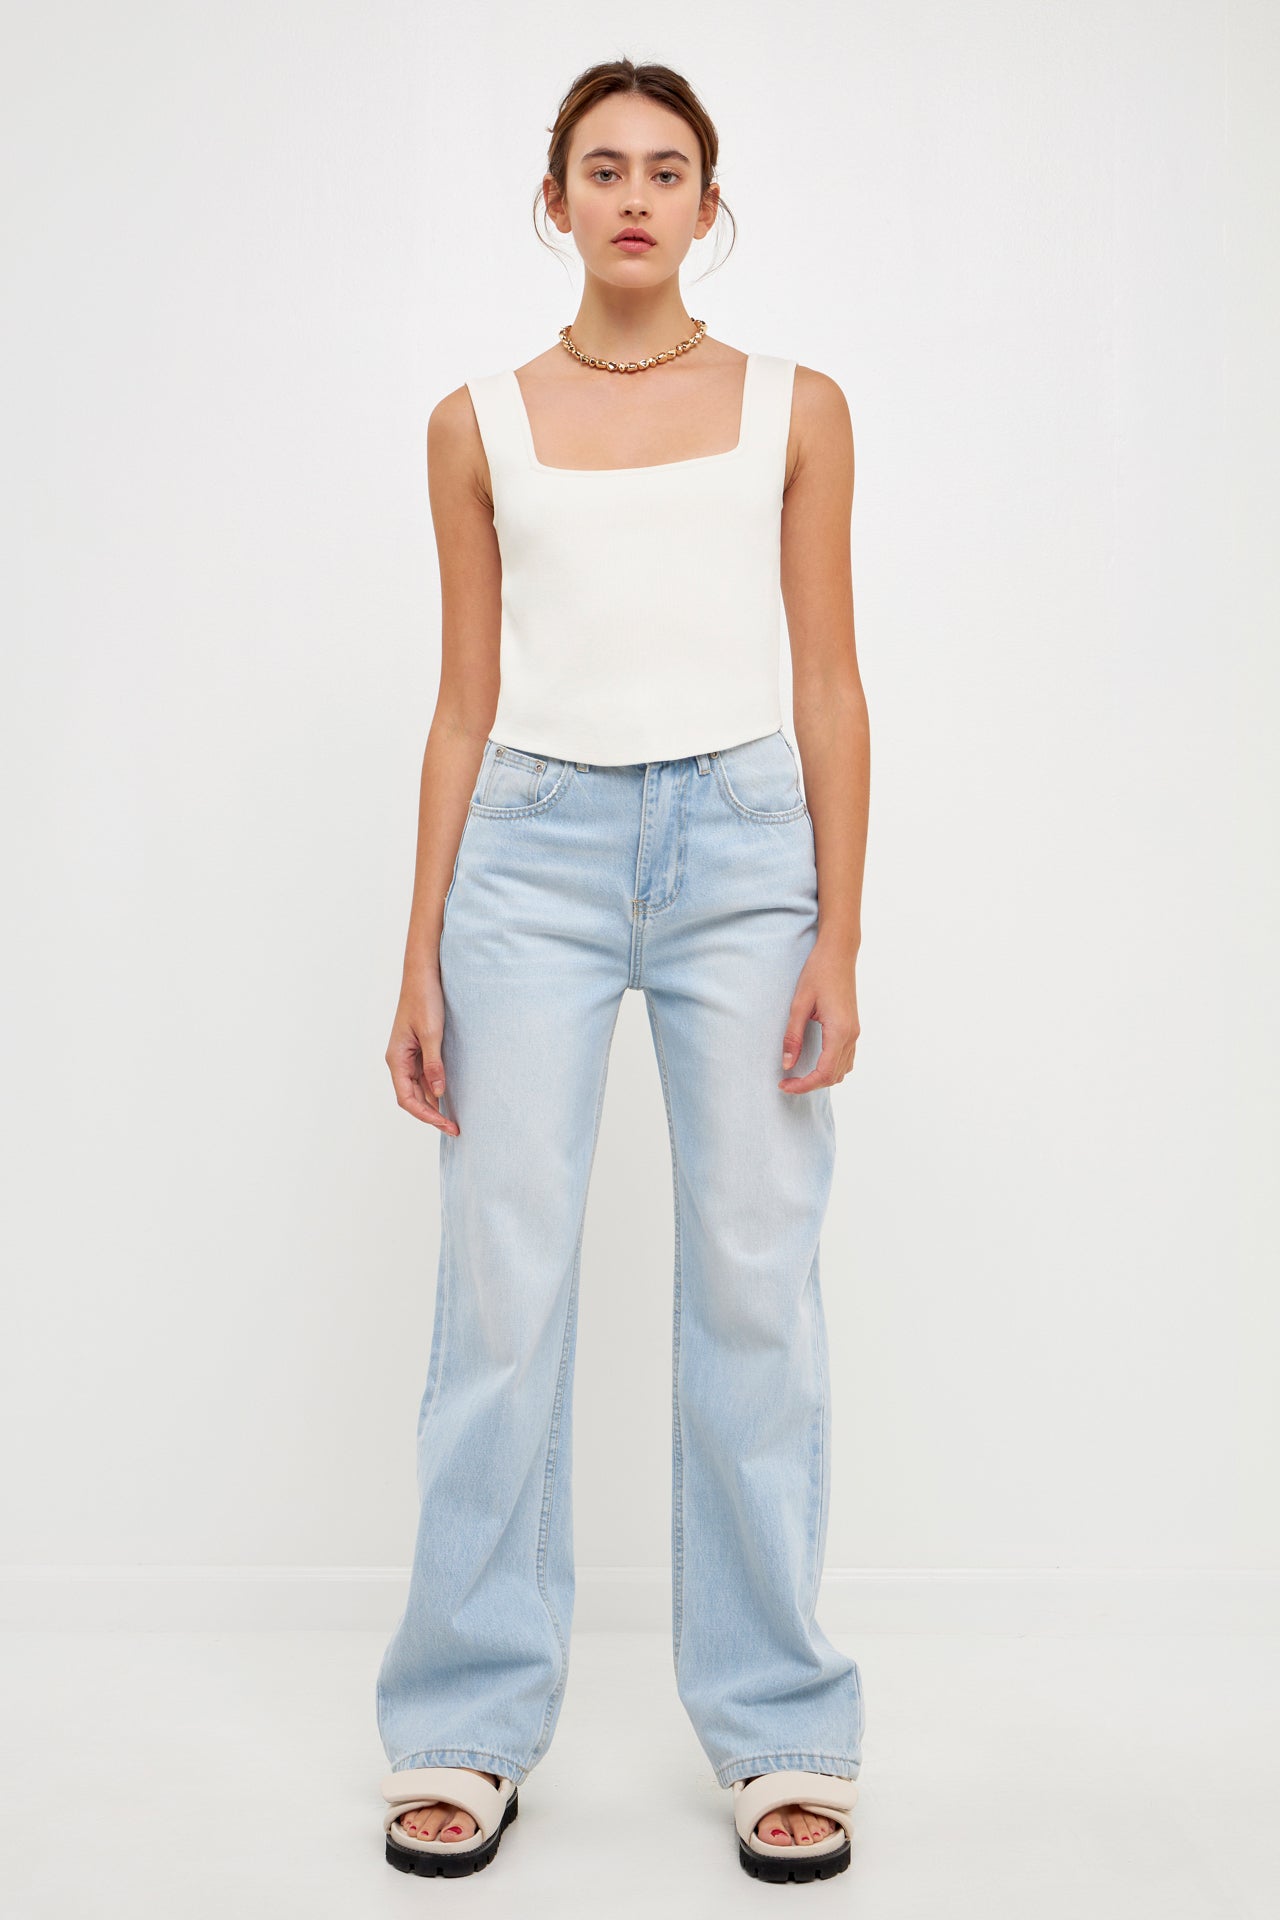 GREY LAB-High Waist Jeans-JEANS available at Objectrare